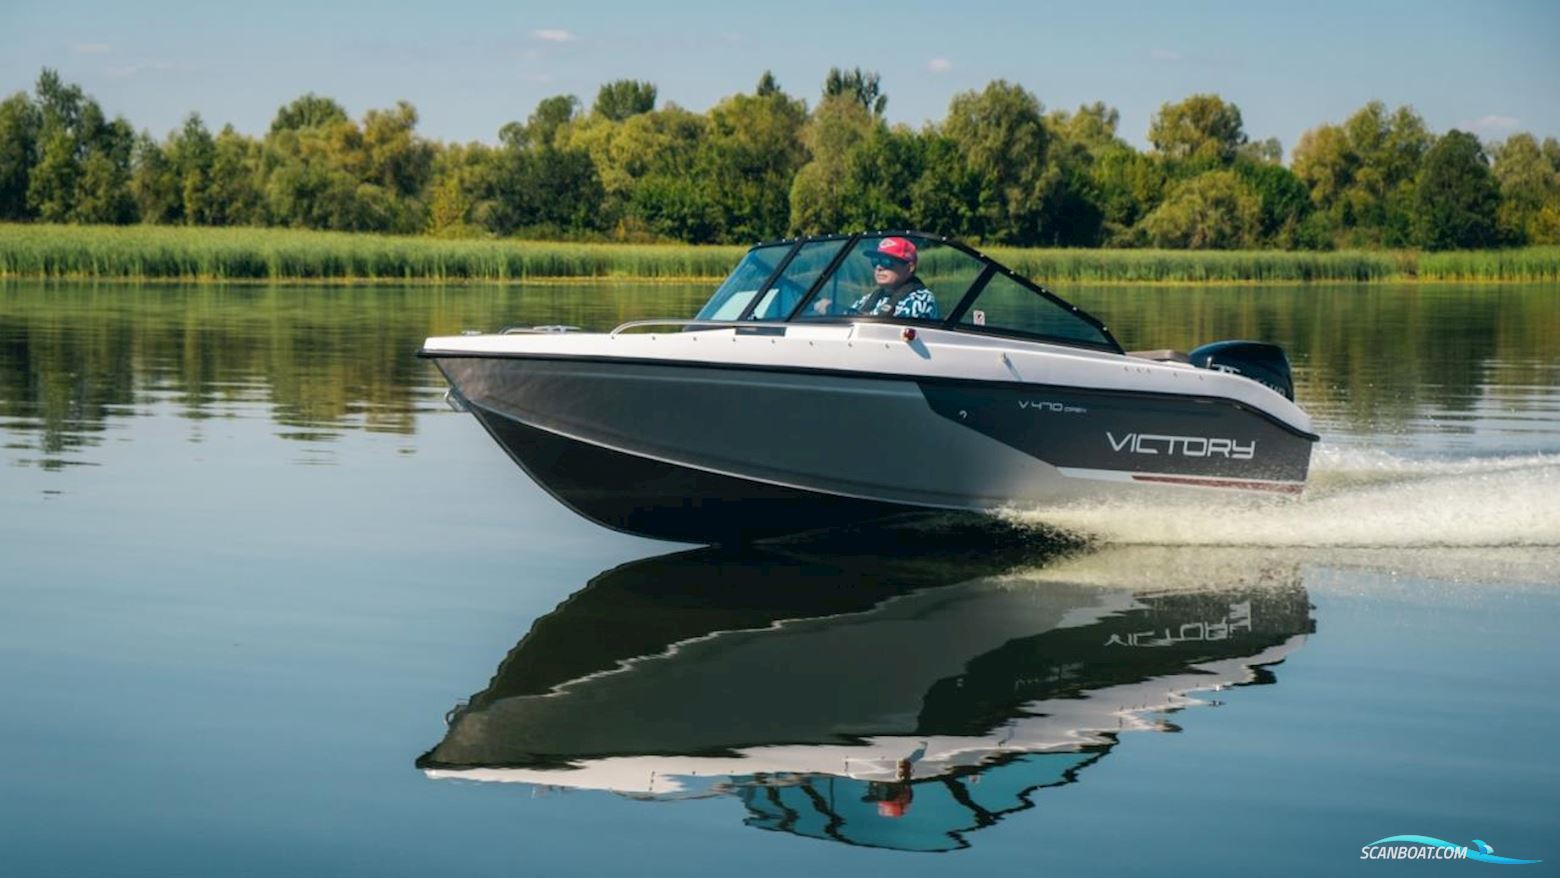 Victory 470 Open Motor boat 2022, with Mercury engine, Sweden